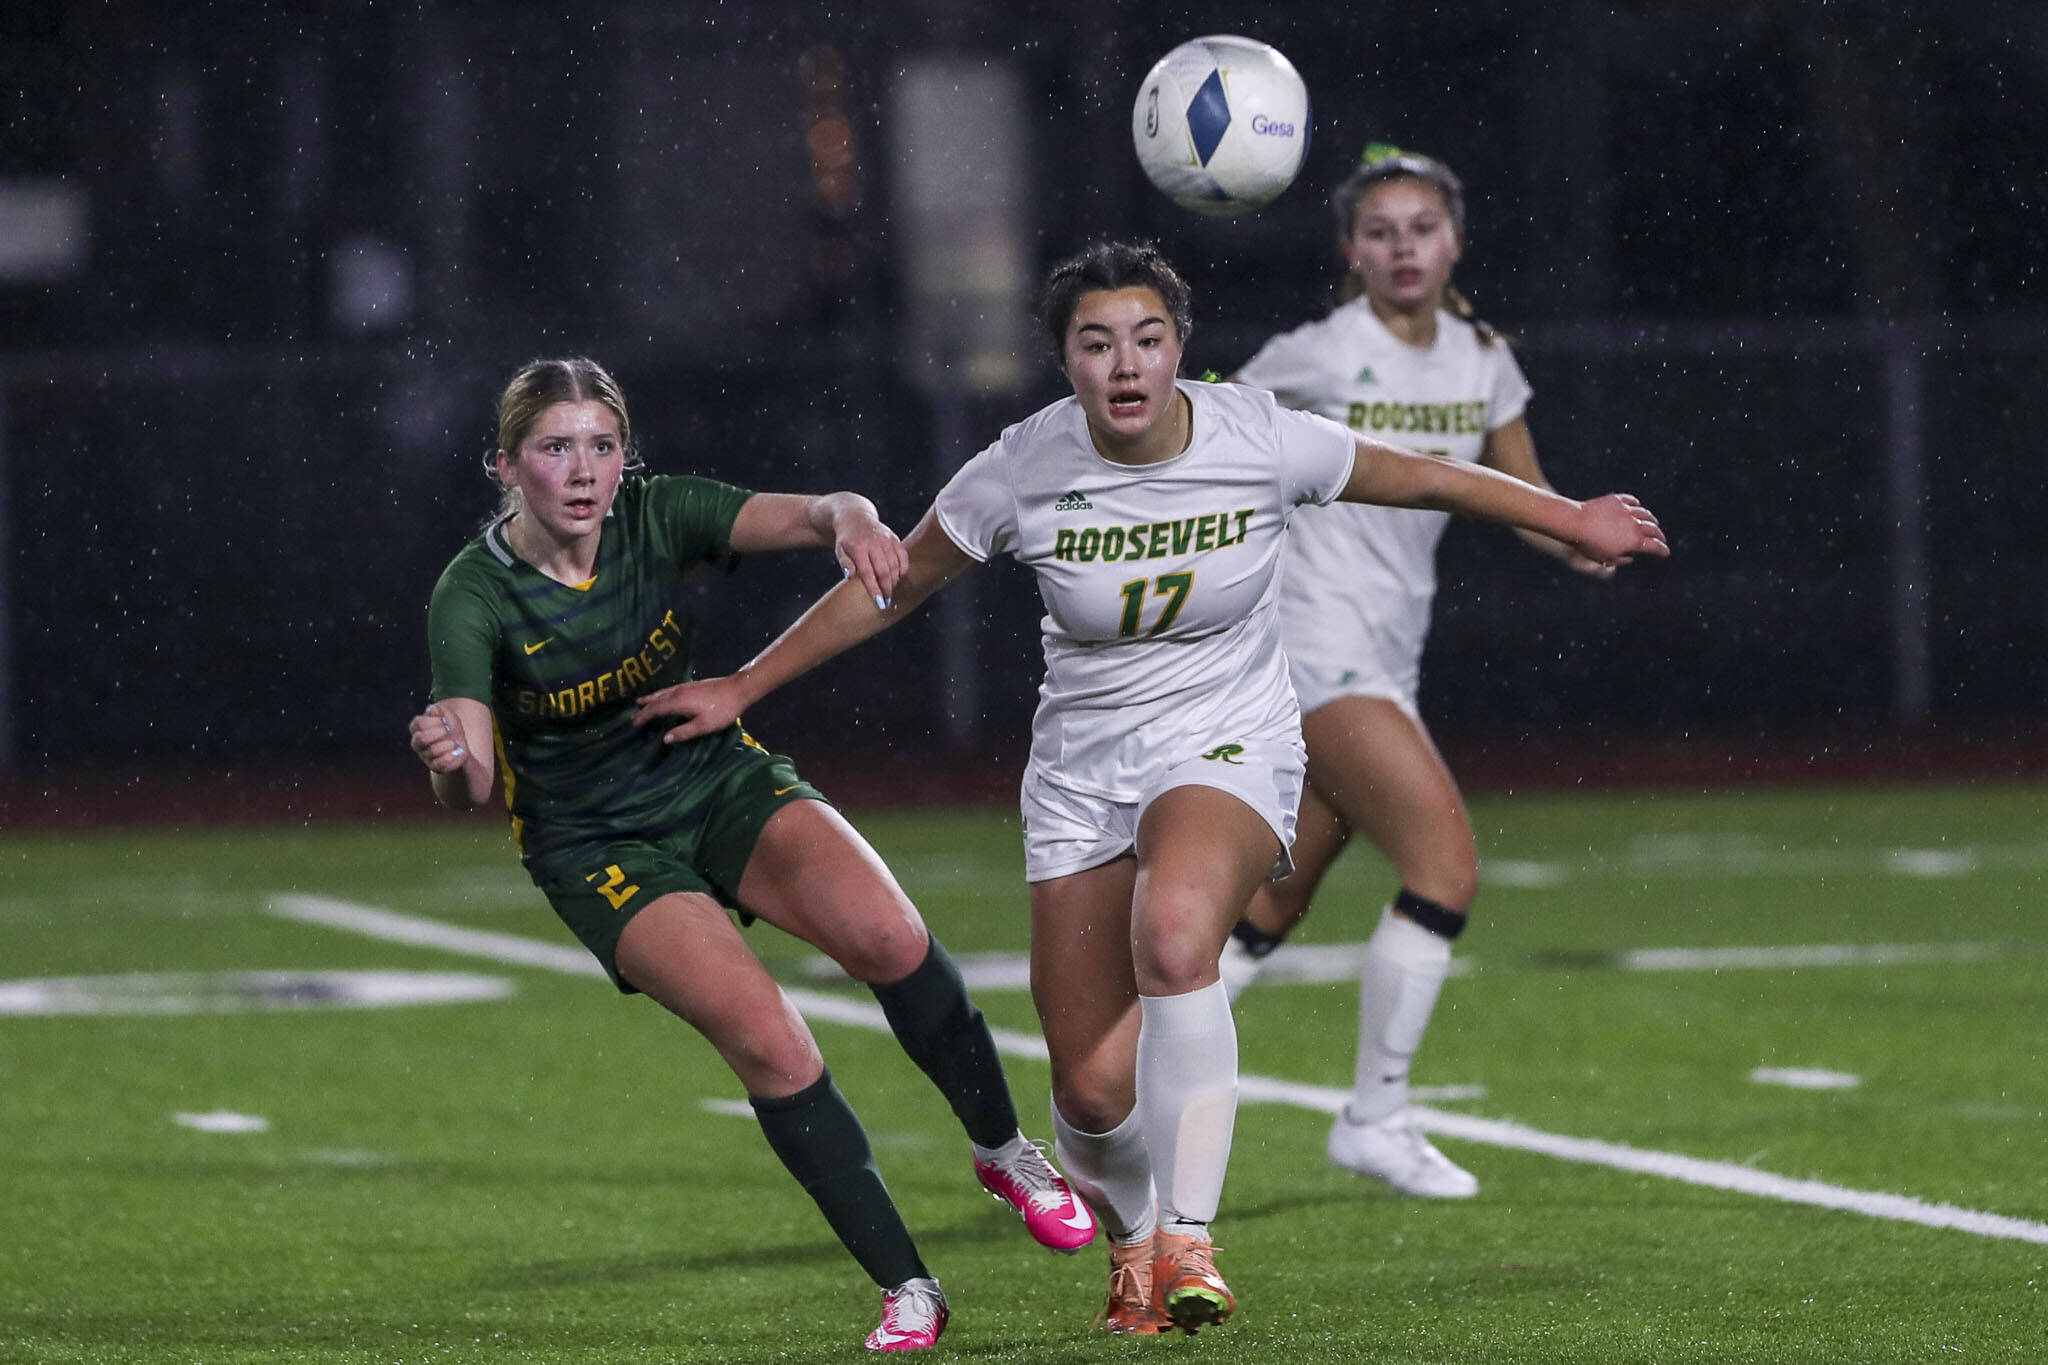 Shorecrest’s Bailey Matthew (2) fights for the ball during the Shorecrest and Roosevelt Class 3A girls soccer state championship game at Sparks Stadium in Puyallup, Washington on Saturday, Nov. 18, 2023. Shorecrest lost, 4-1. (Annie Barker / The Herald)